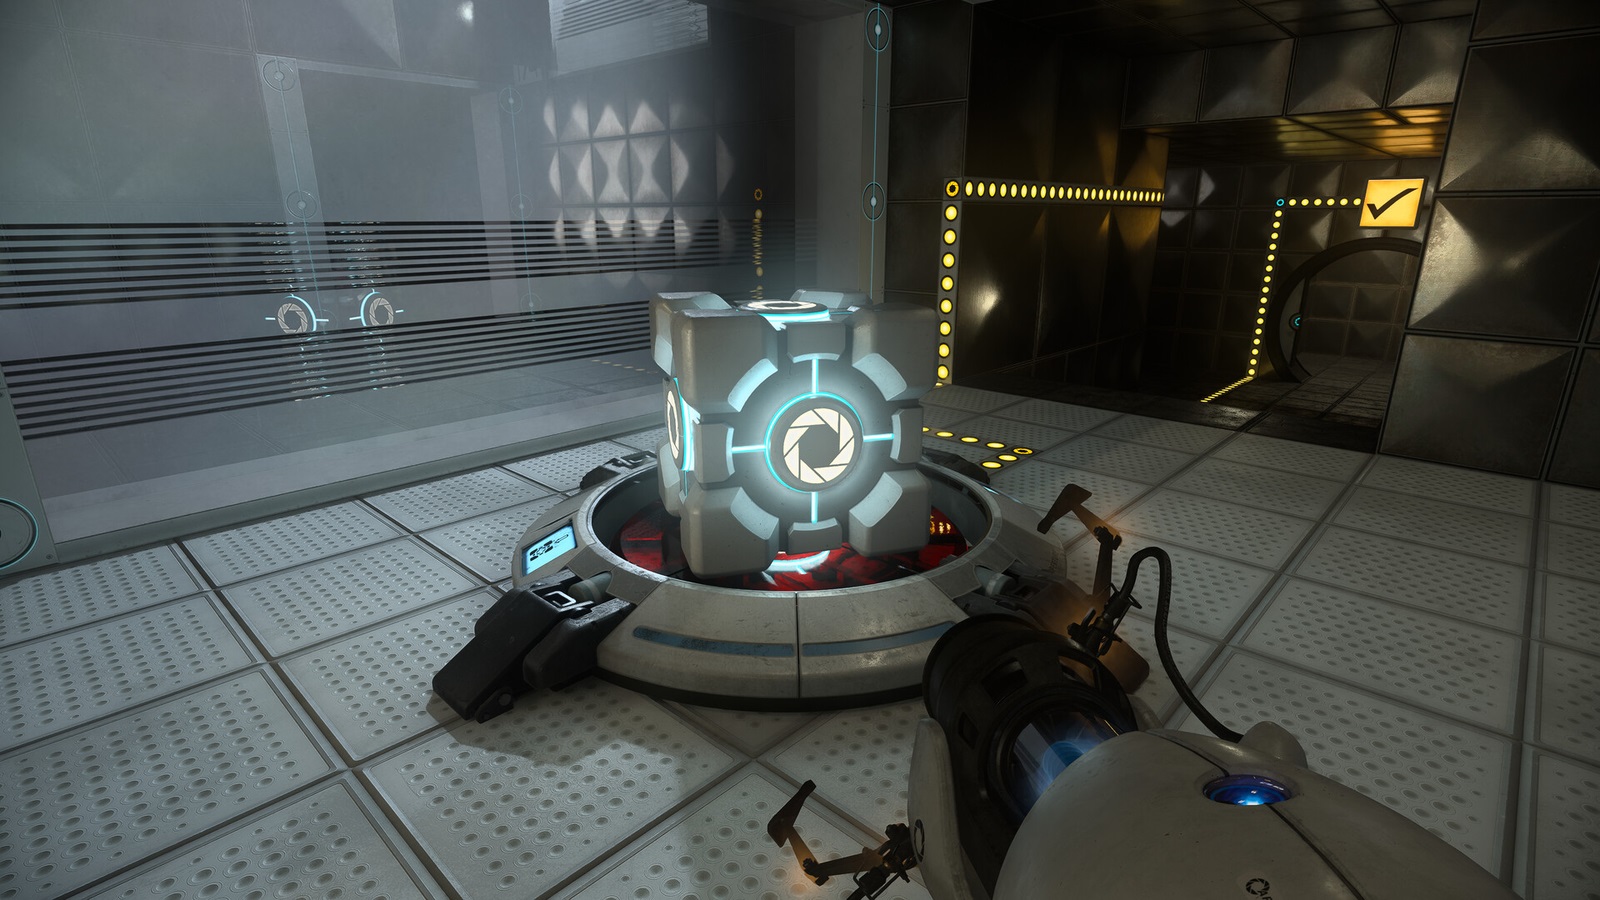 Now is a great time to play the Portal series on PC